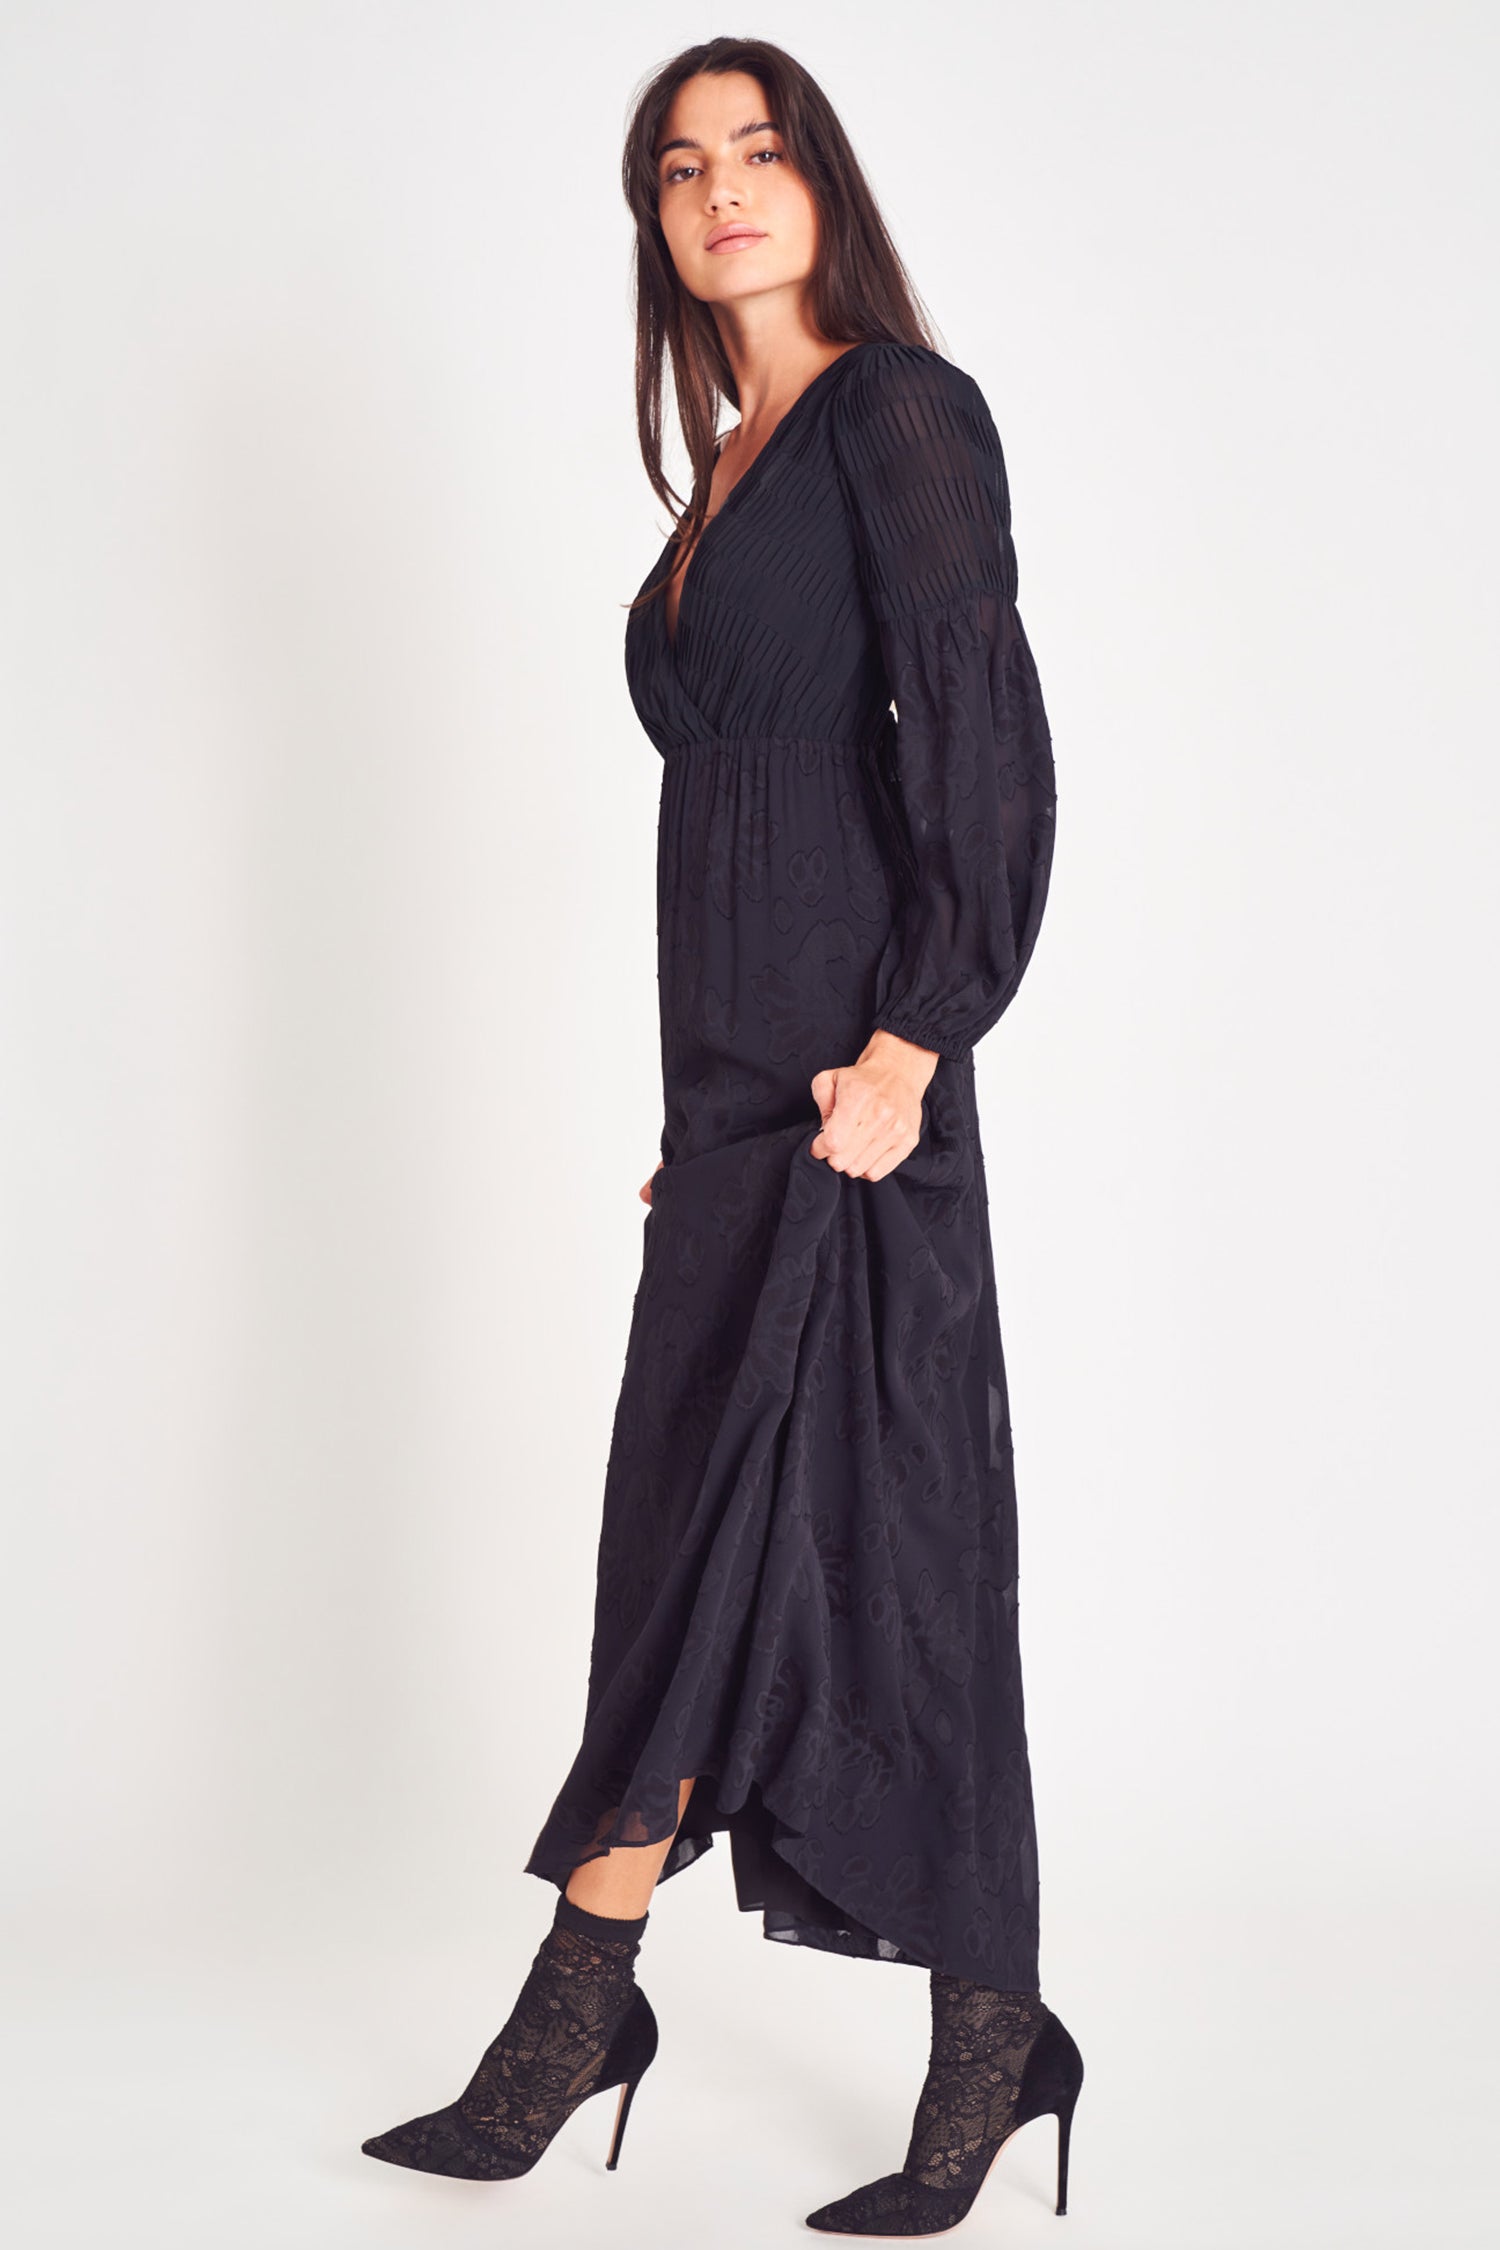 Black v neck long sleeve maxi dress with floral jacquard and pleated texture fabric. 